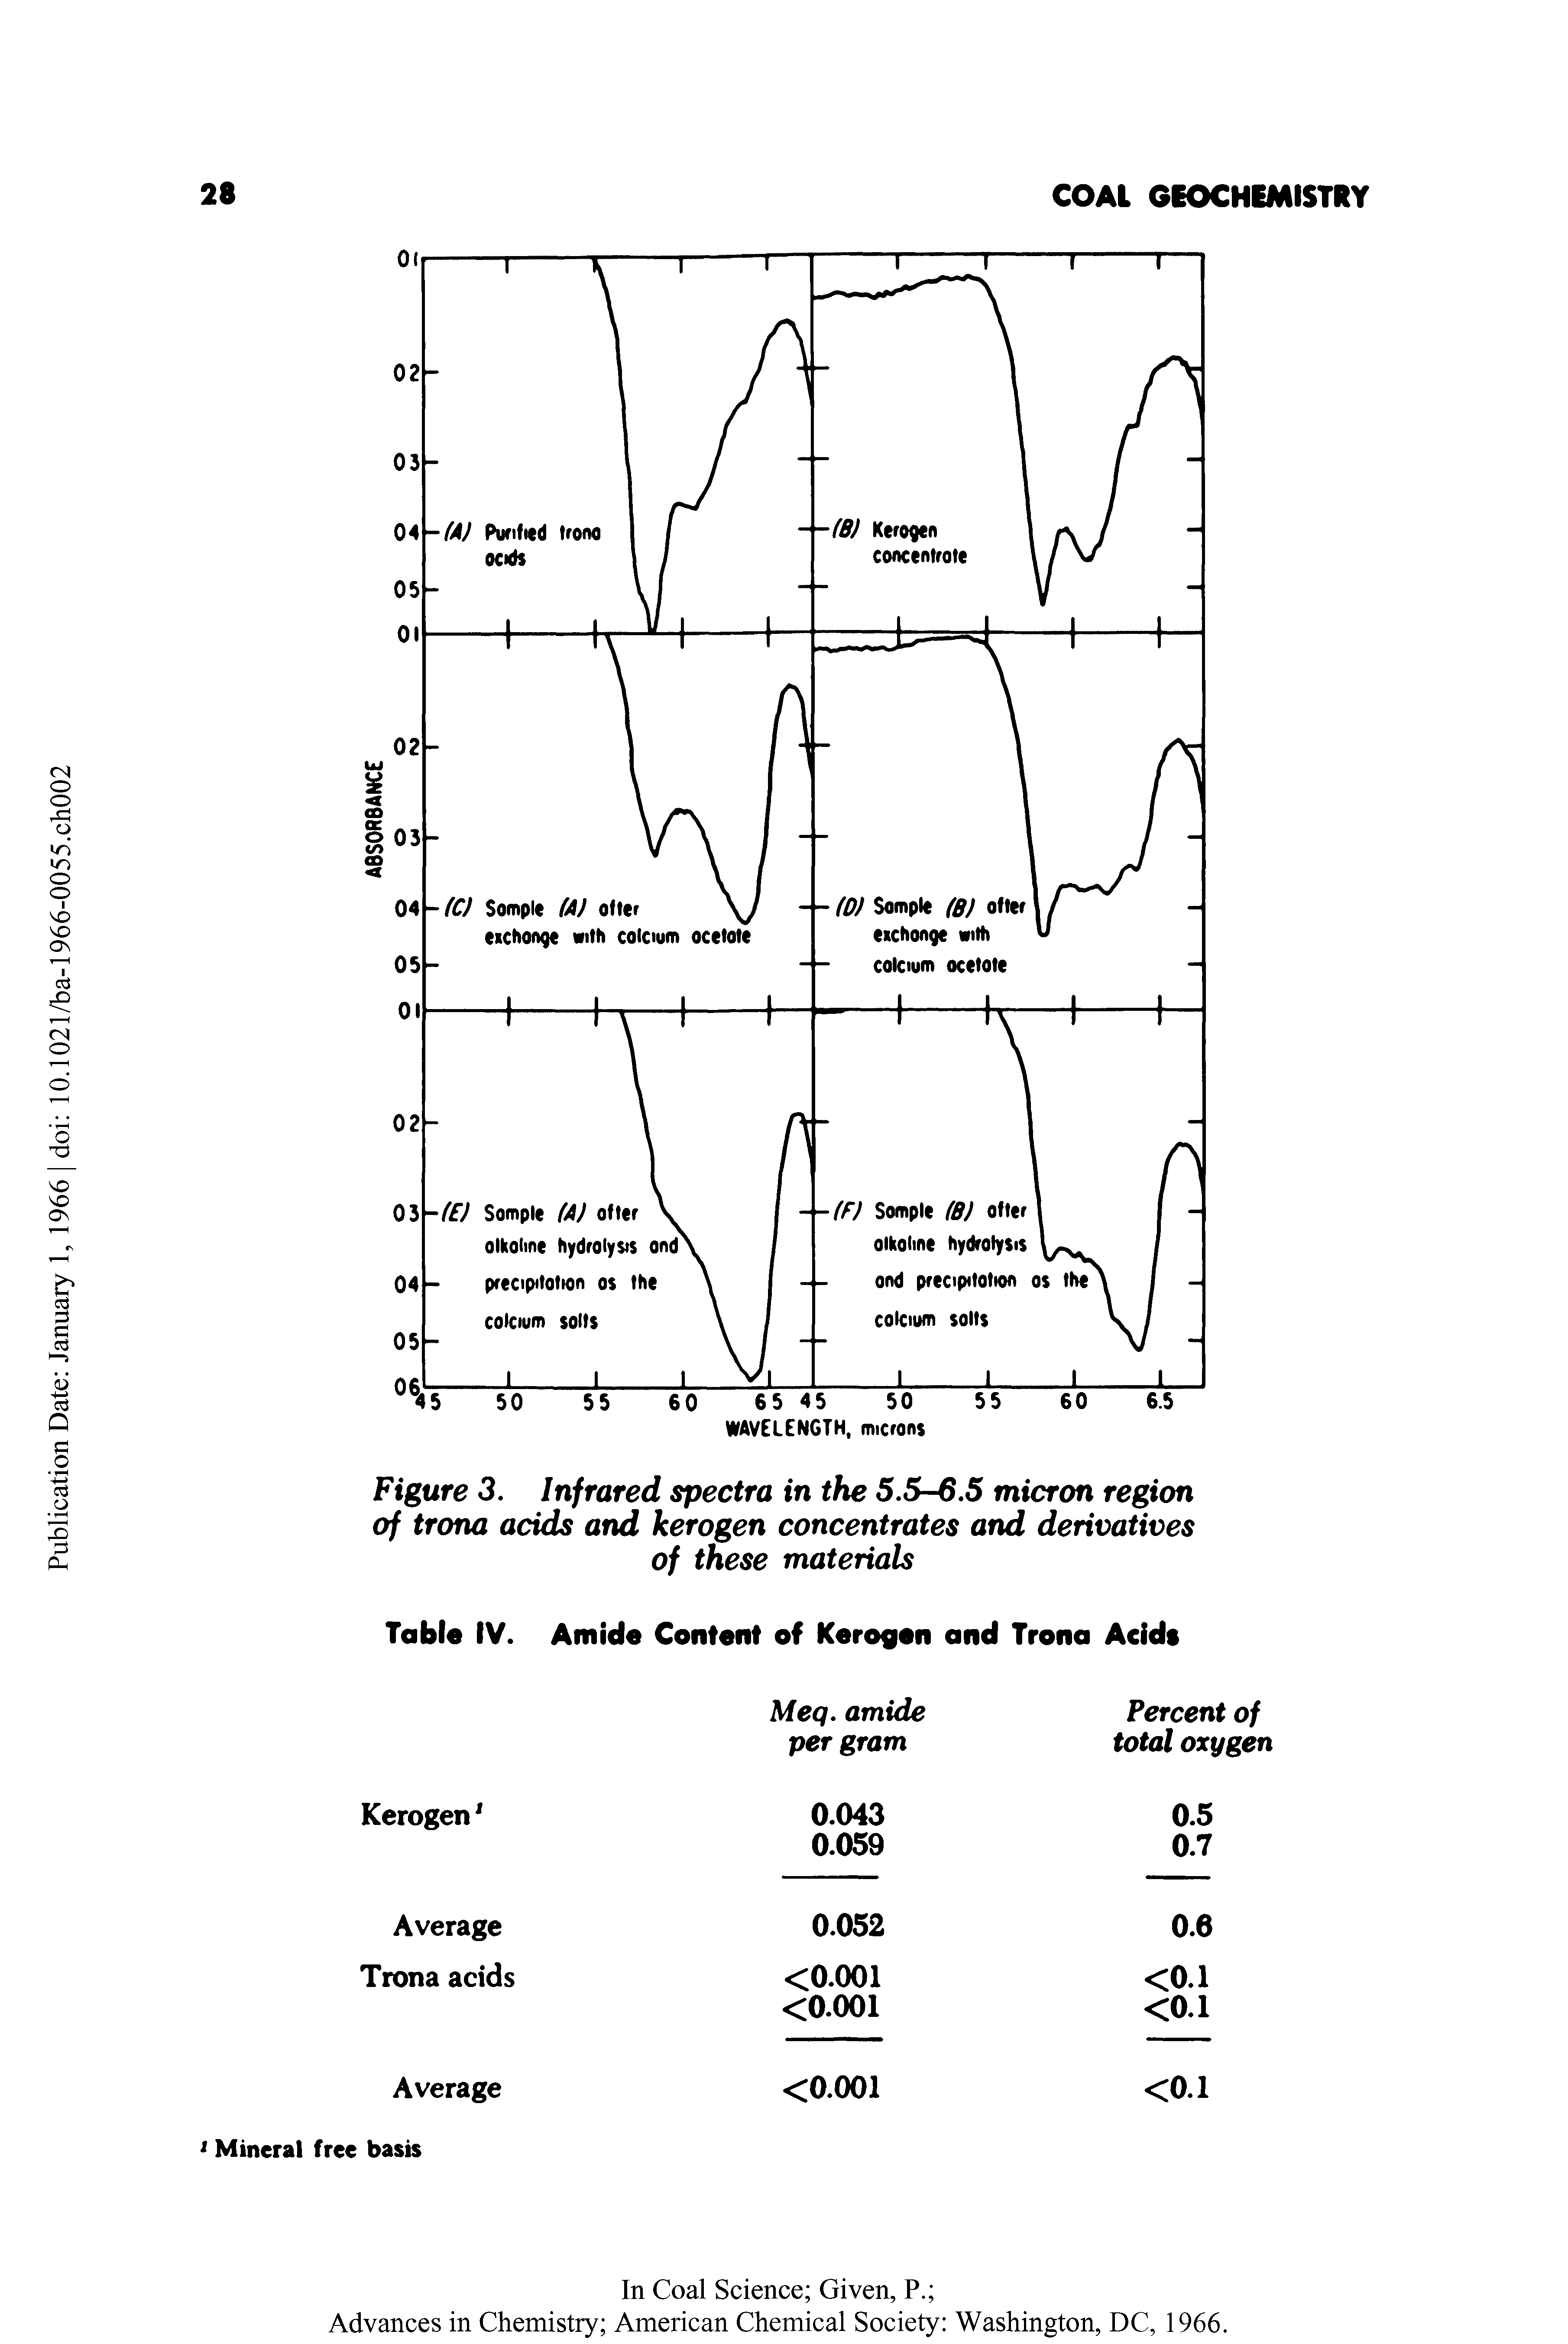 Figure 3. Infrared spectra in the 5.5-6.5 micron region of trona acids and kerogen concentrates and derivatives of these materials...